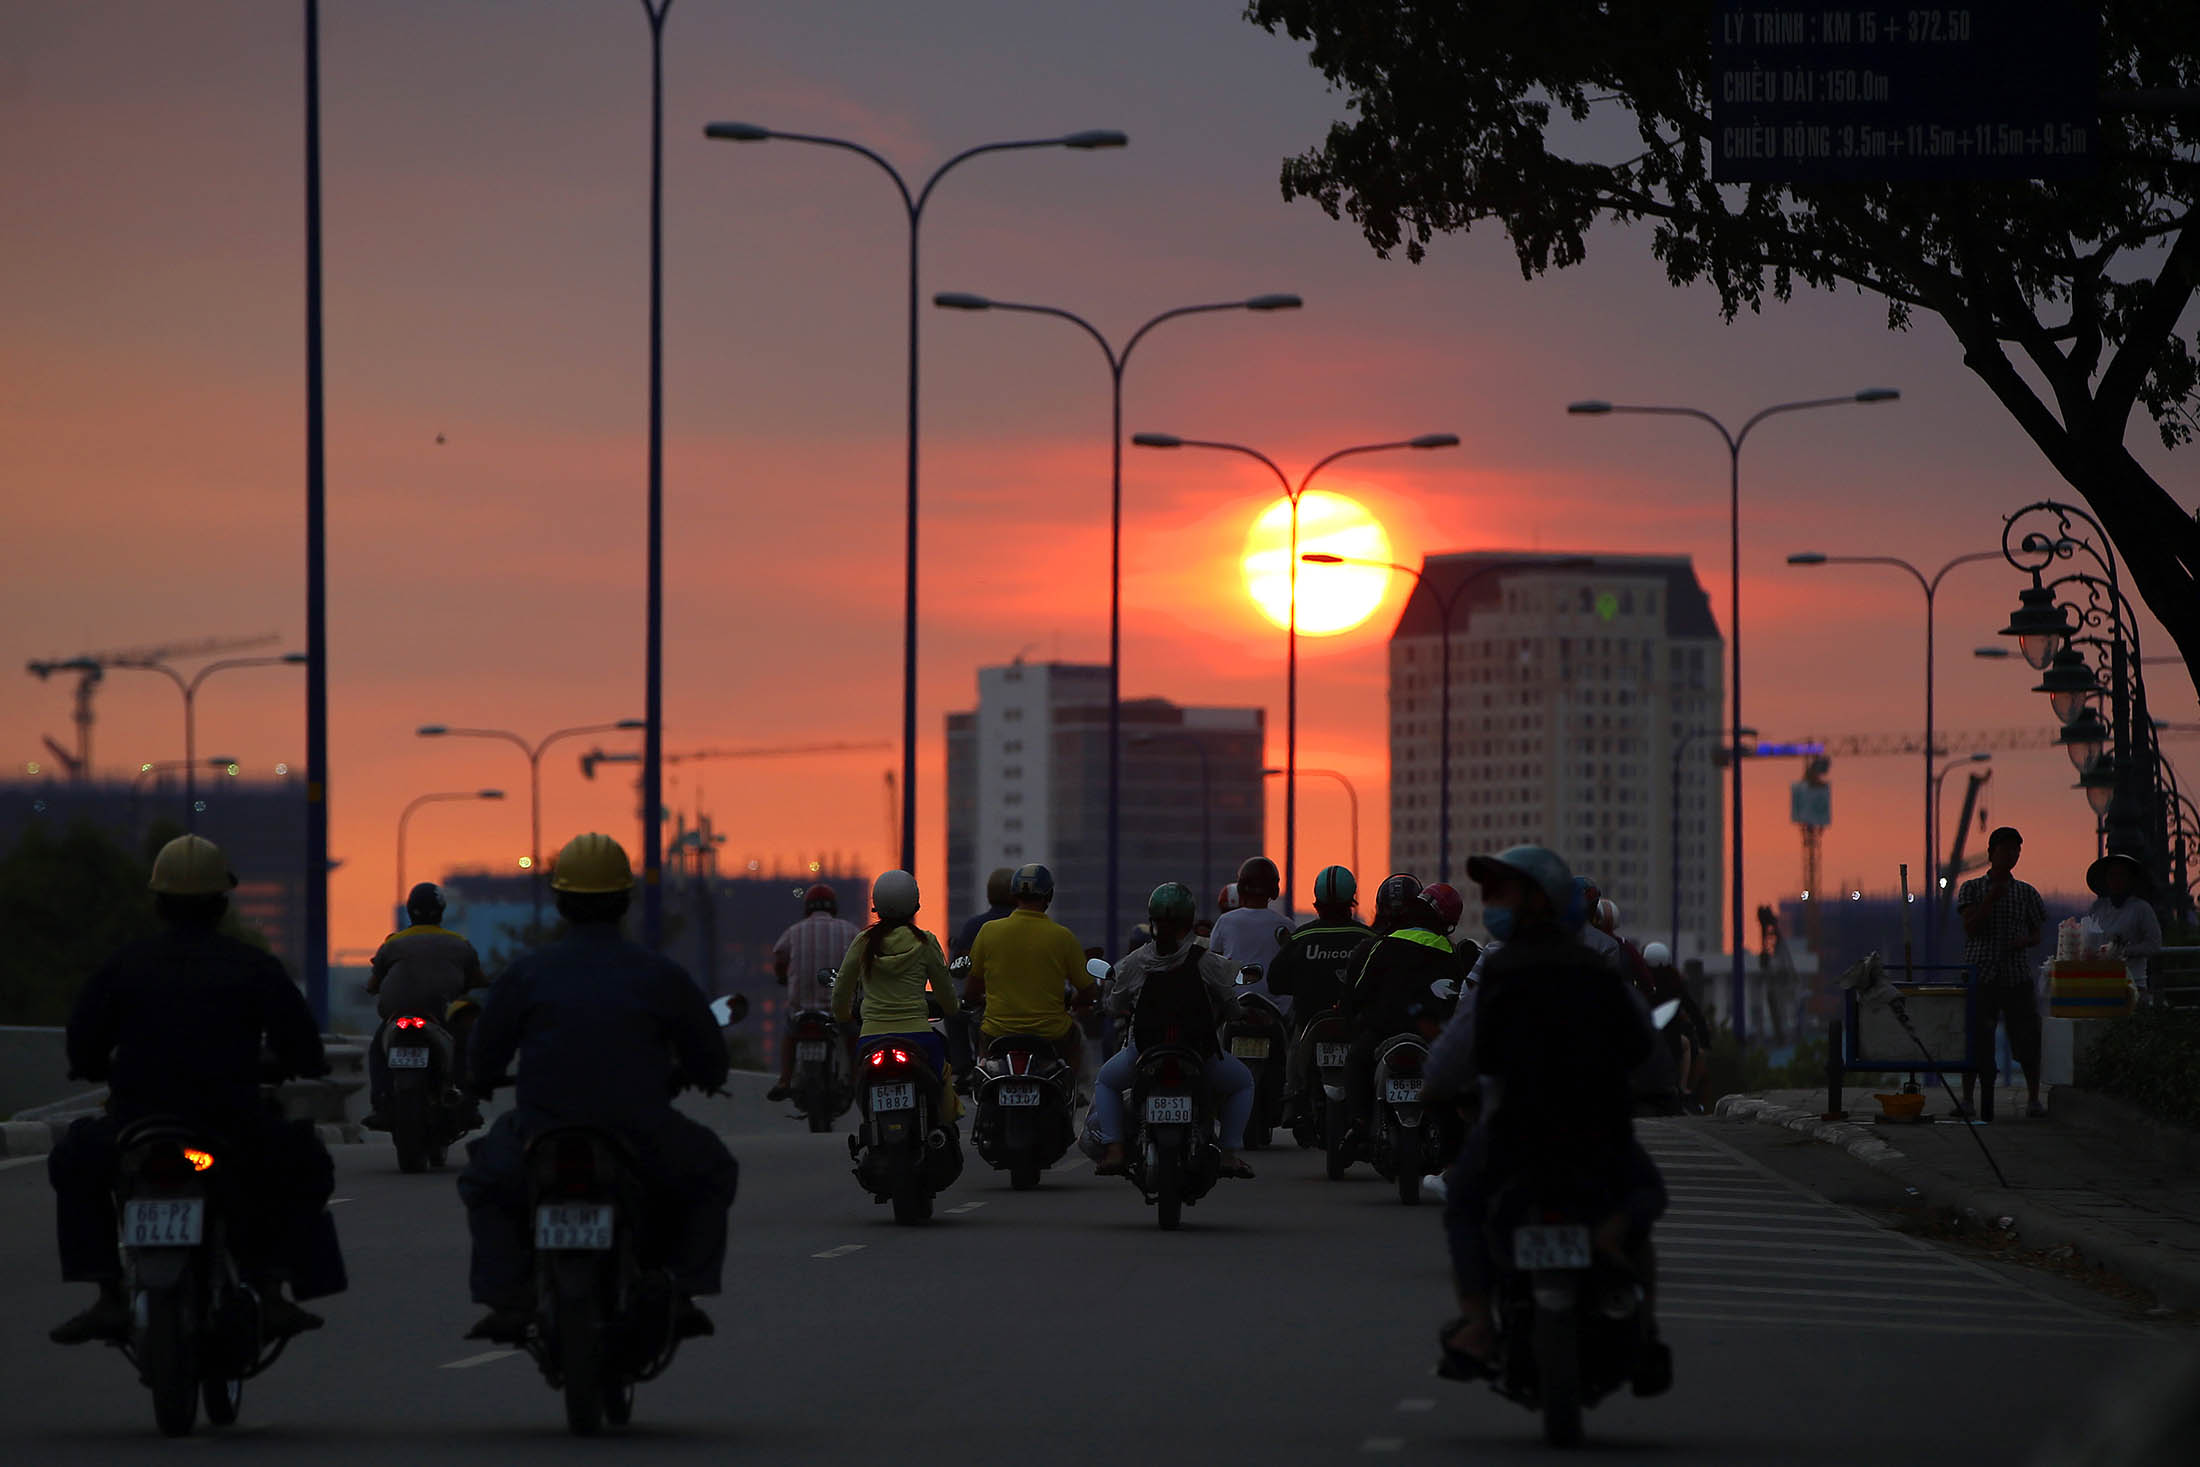 Motorcyclists travel along a road during sunset in Ho Chi Minh City, Vietnam, on Tuesday, Jan. 10, 2017. Vietnam's economy expanded more than 6 percent for a second year in 2016, defying a regional slowdown to remain one of the world's best performers as retails sales rose 10.2 percent.
